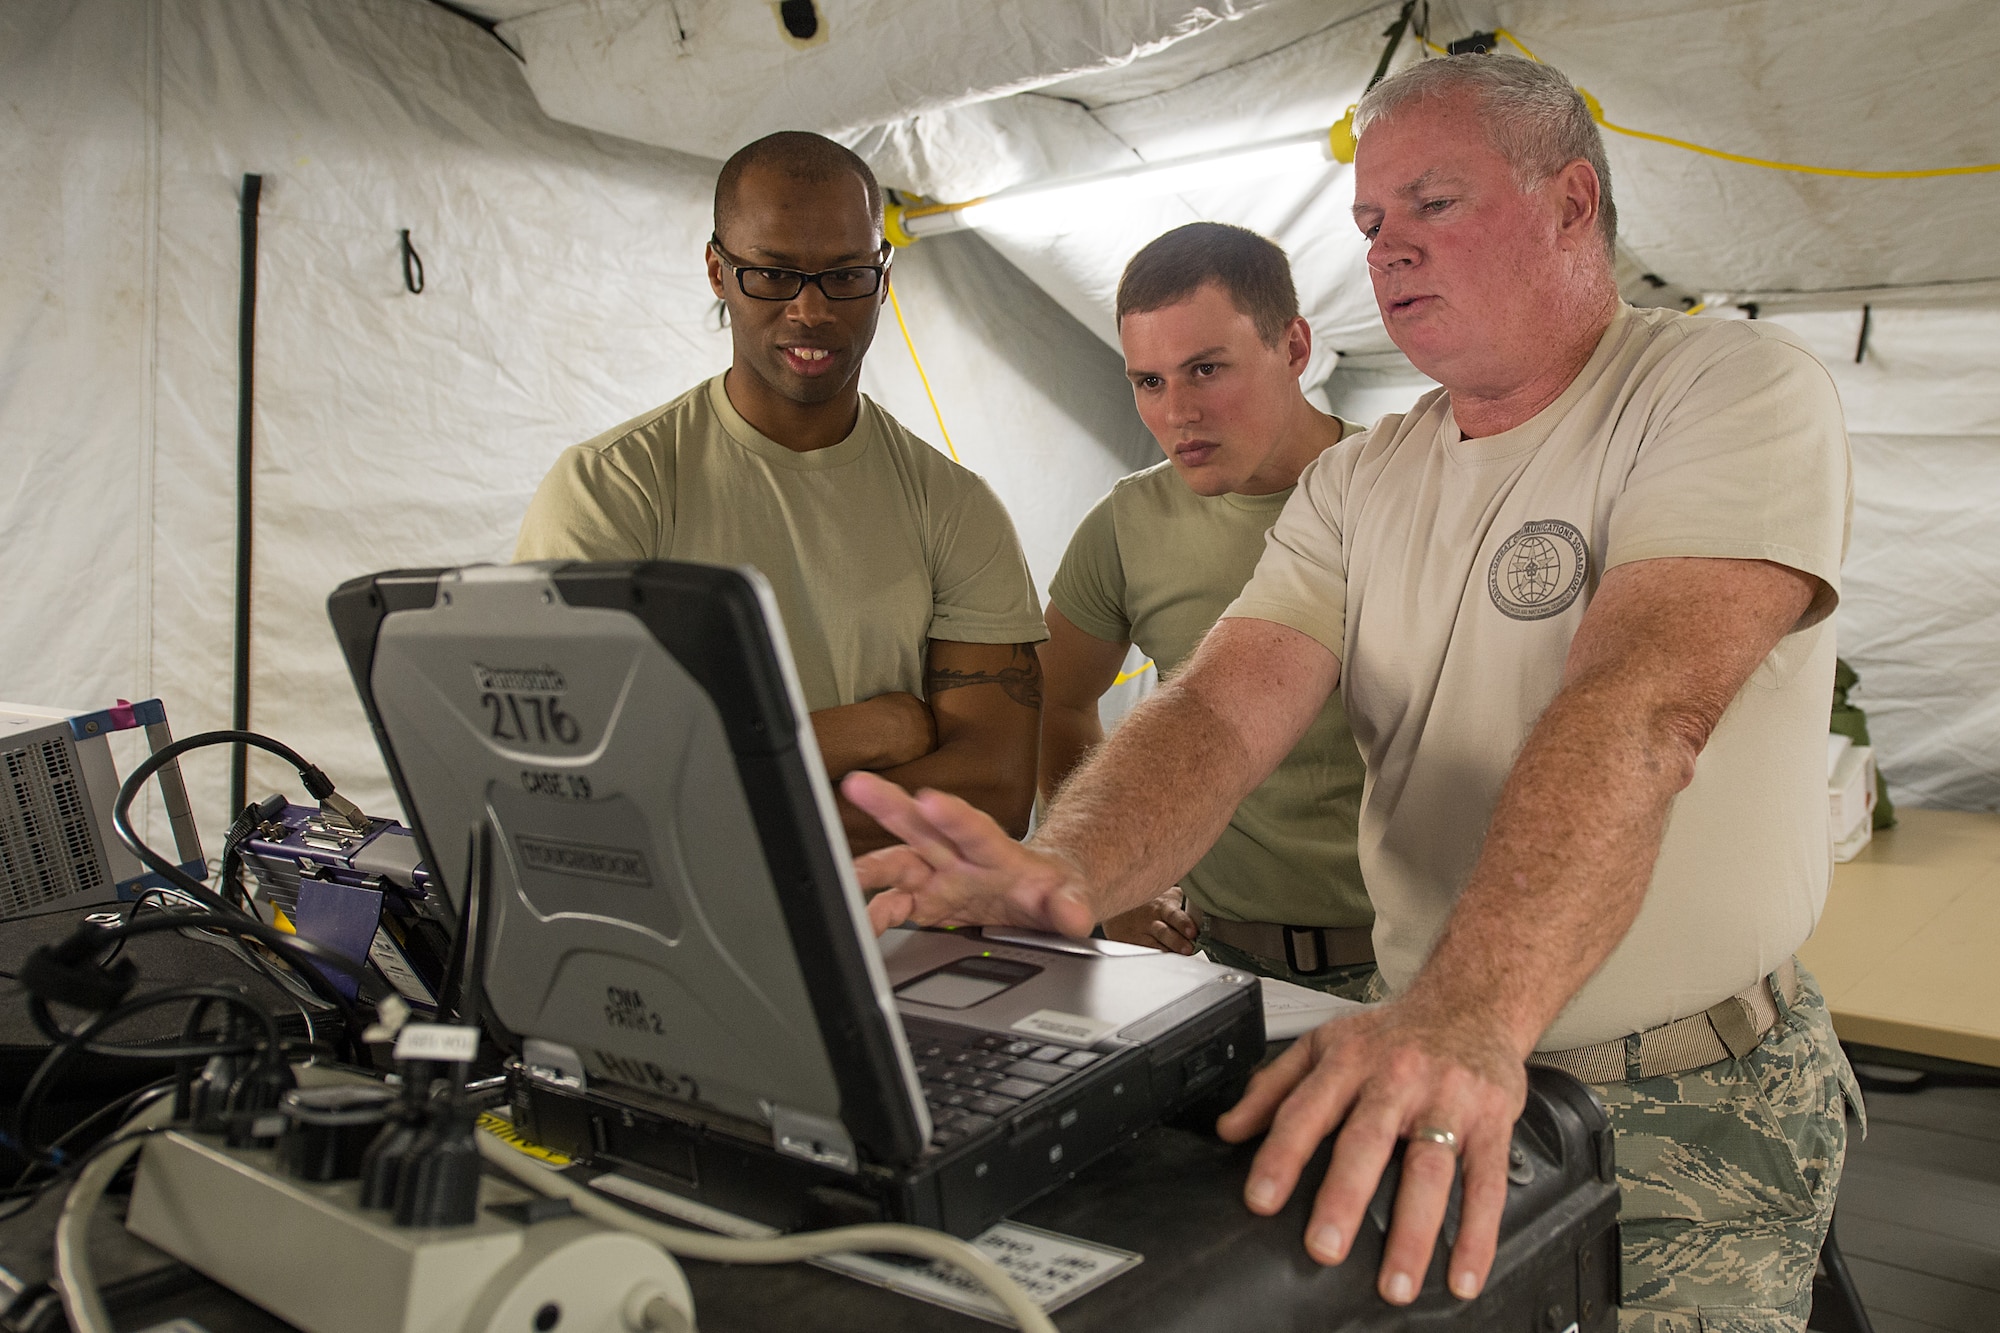 An RF transmission superintendent, right, with the 283rd Combat Communications Squadron (CCS) from Dobbins Air Reserve Base, Georgia Air National Guard, discusses satellite transmission data information obtained from a Theater Deployable Communications System with two Airmen from the 117th Air Control Squadron during the Sentry Savannah 15-2 exercise at The Air Dominance Center, Savannah, Ga., May 10, 2015. Sentry Savannah is a National Guard Bureau sponsored training event with a focus on Joint Dissimilar Air Combat Training and 5th Generation Fighter Integration. It offers a chance for fighter pilots to participate in war simulations that depict what they would face in real-world scenarios. During the exercise the 283rd CBCS provided NIPR, SIPR, and voice services to the 117th Air Control Squadron Air Battle Element and extended service to their deployed radar site. Working together the two units provided vital data to help the fighter pilots complete their missions. (U.S. Air National Guard photo by the 116th Air Control Wing Public Affairs/Released) (Names of military personnel have been withheld for security purposes)